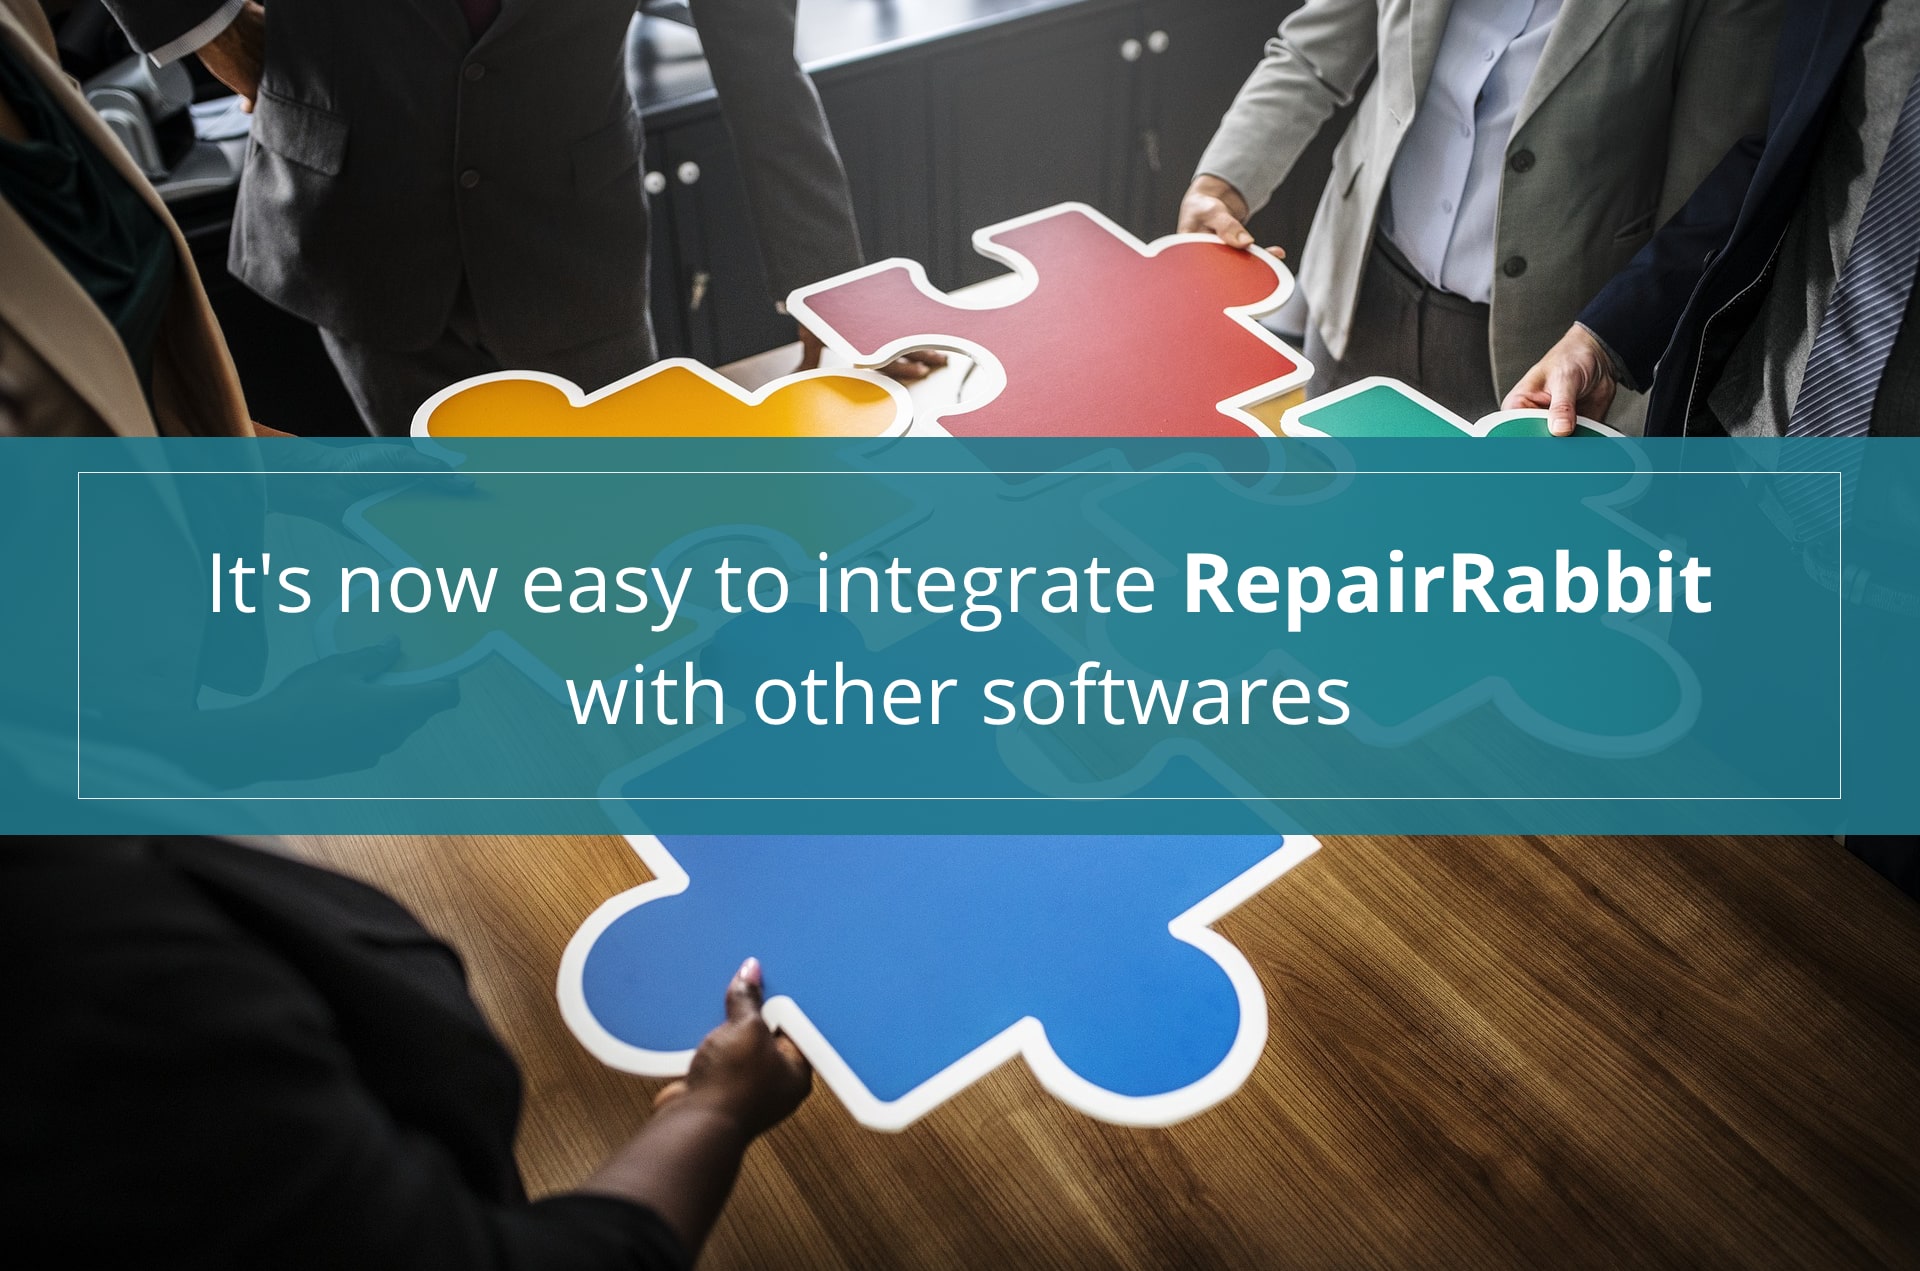 It's now easy to integrate RepairRabbit with other softwares